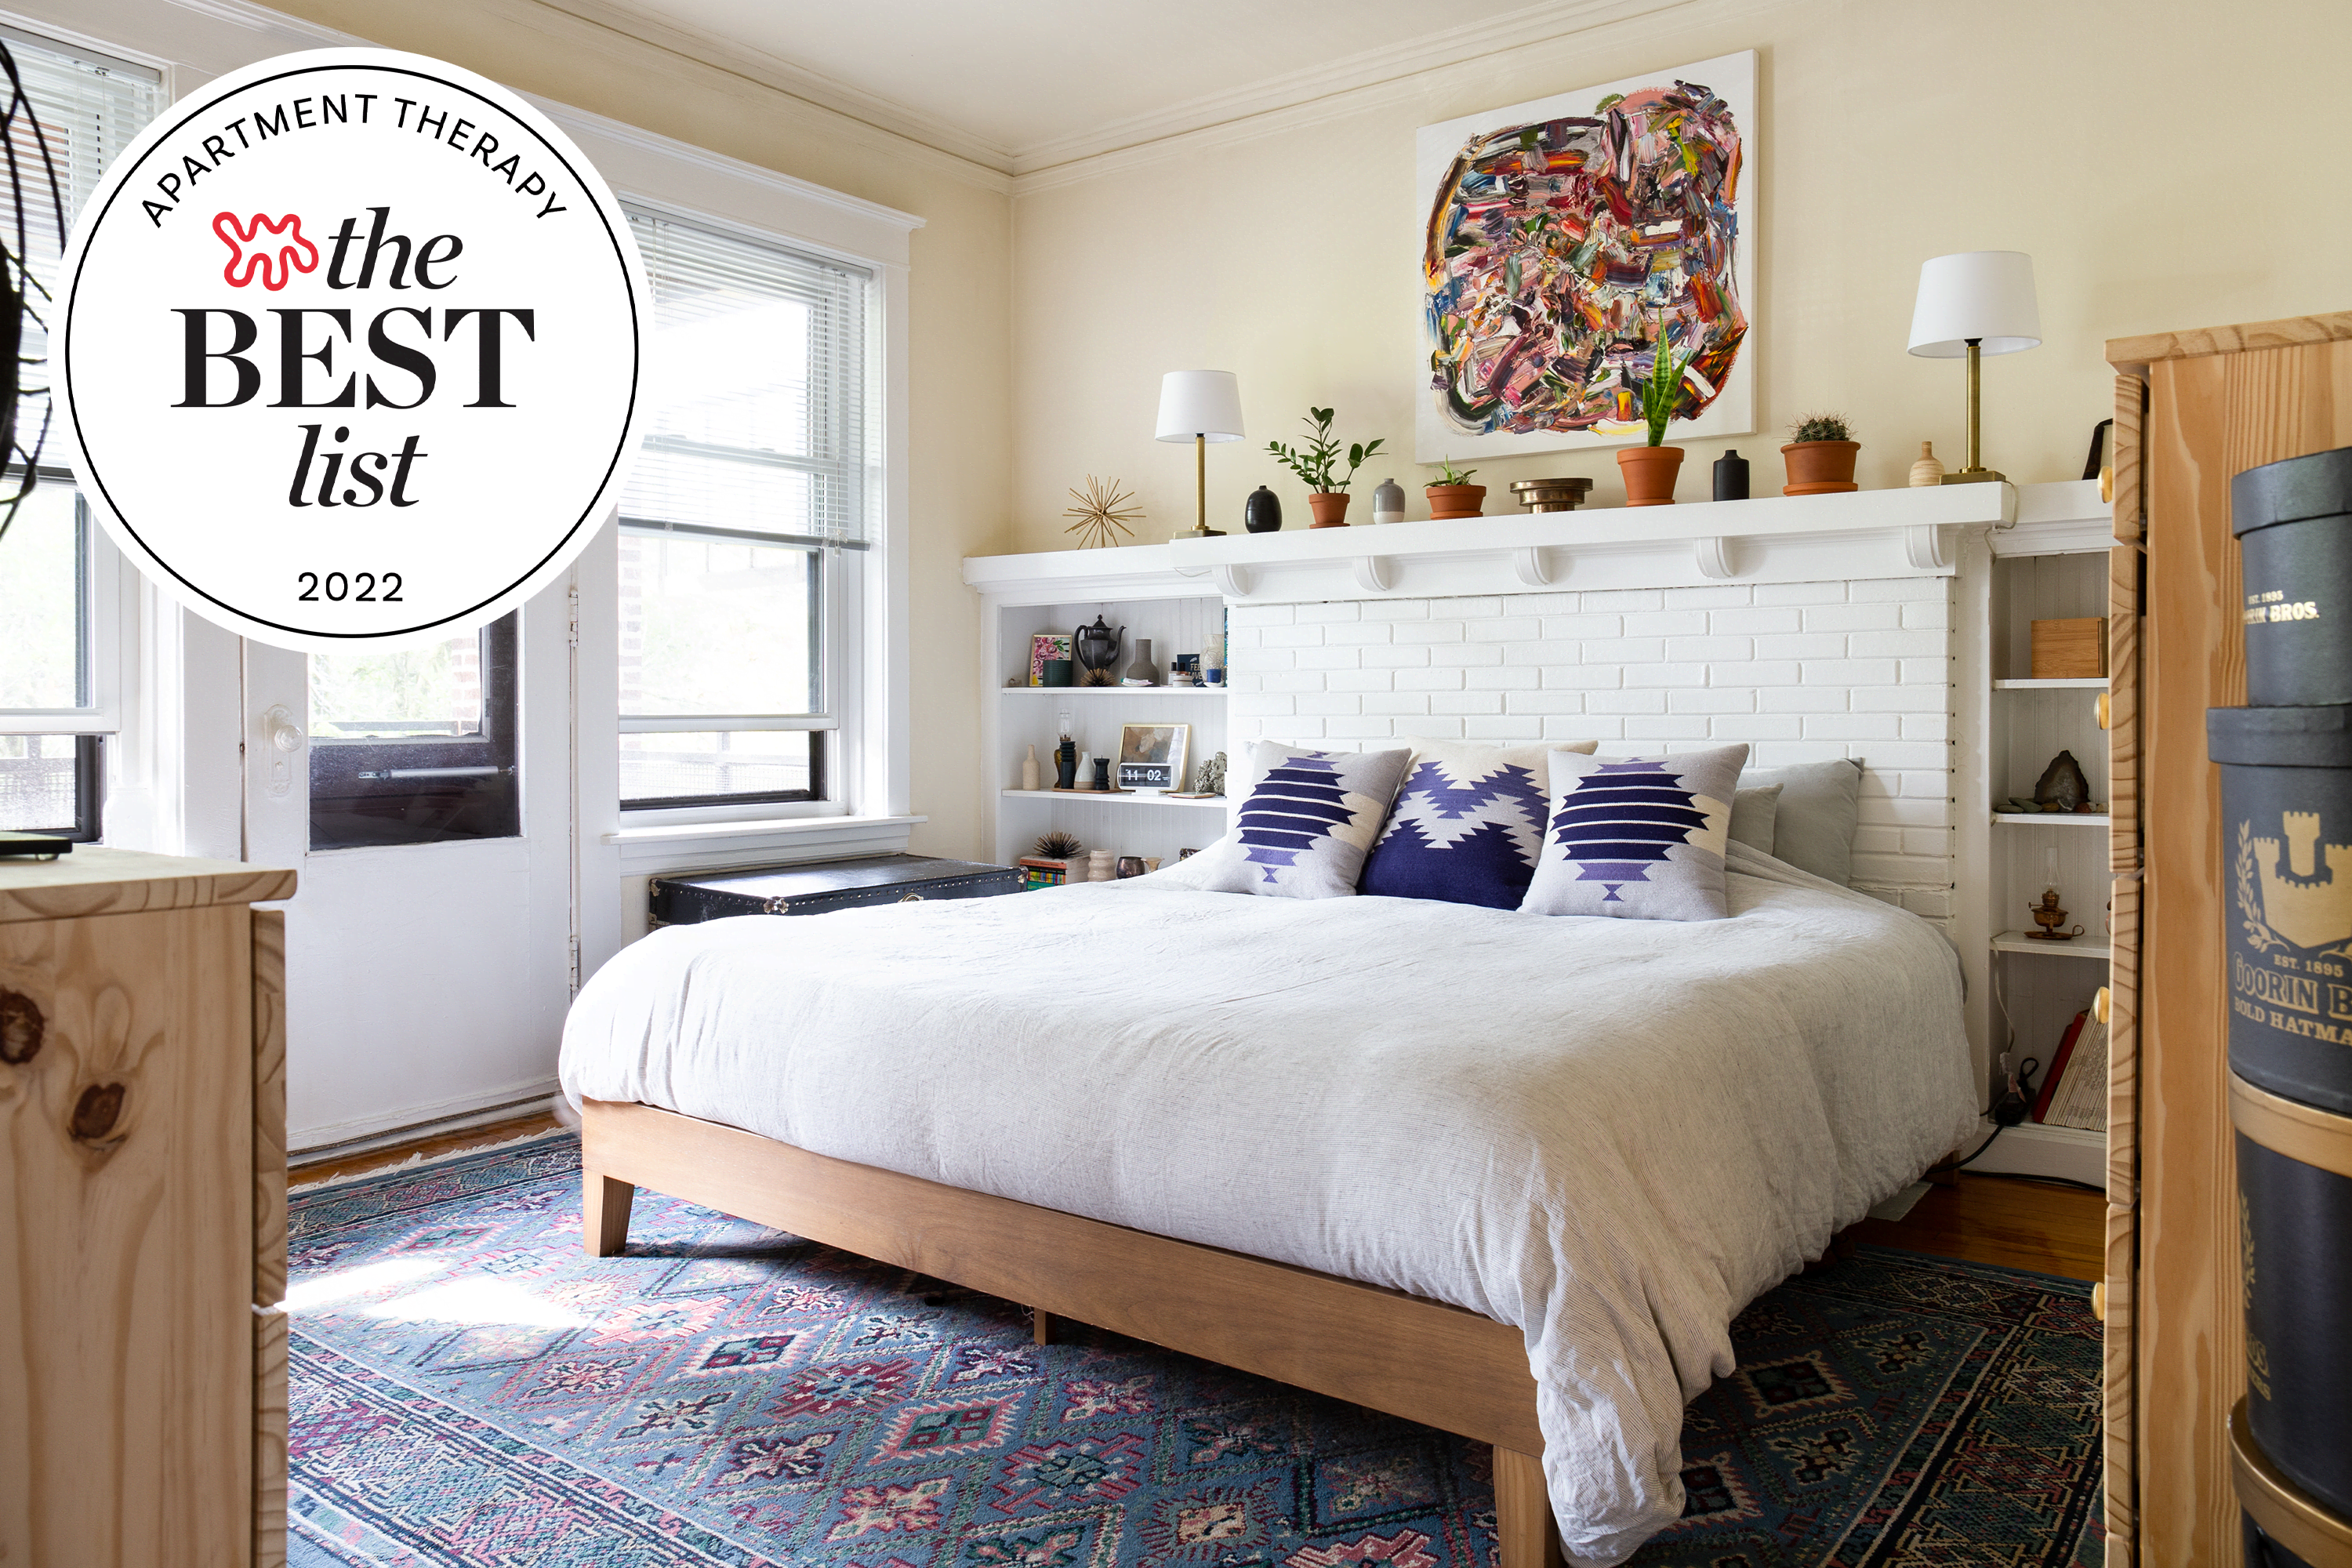 11 Best Affordable Home Finds 2022: Bedding, Towels, Vacuums